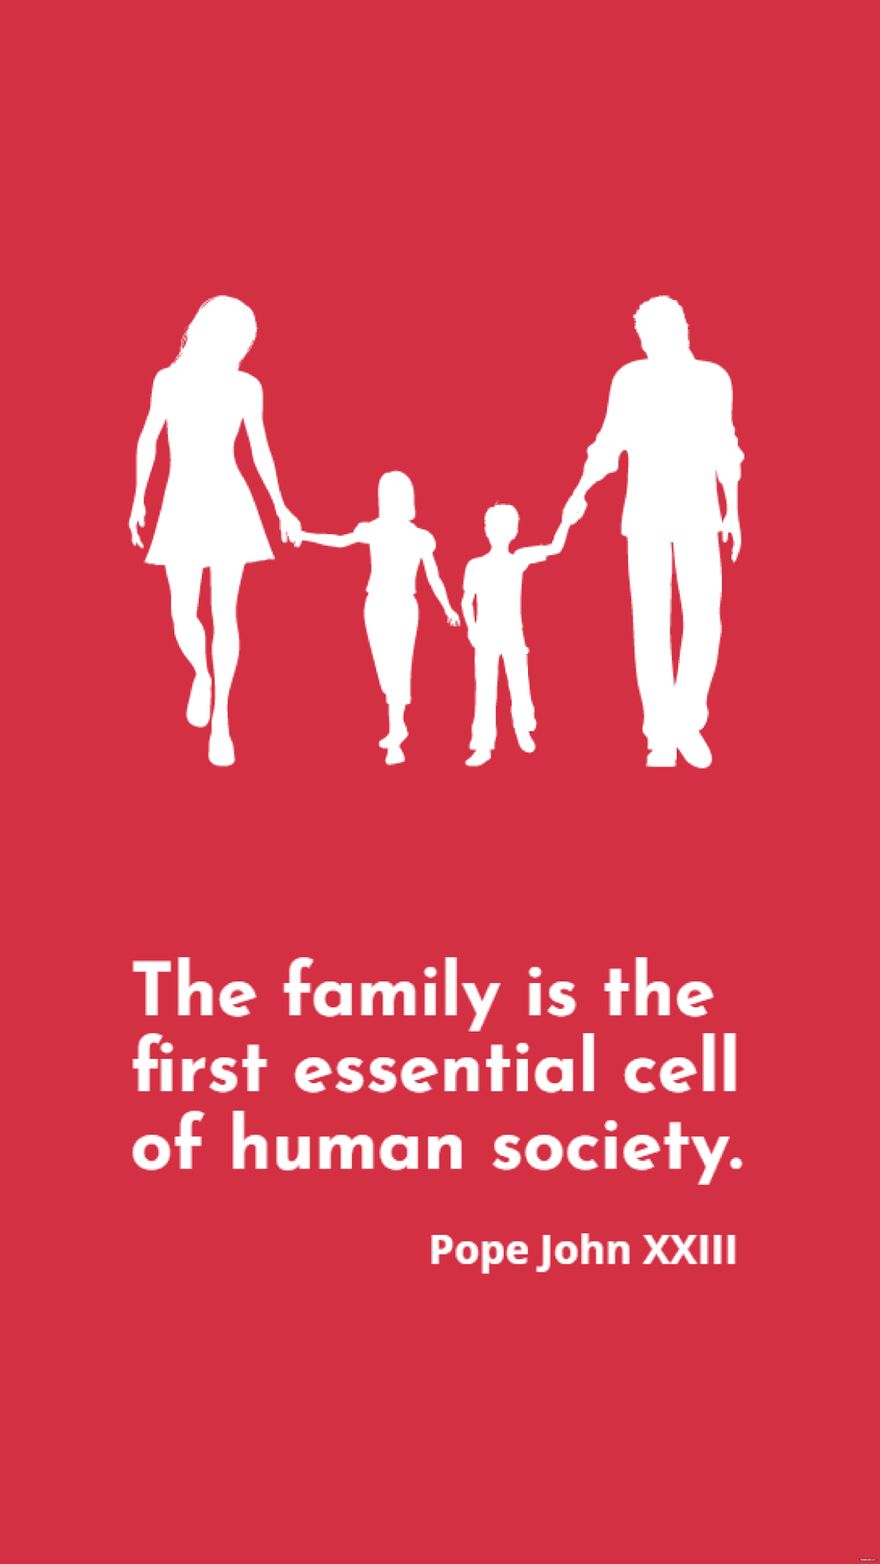 Pope John XXIII - The family is the first essential cell of human society. Template